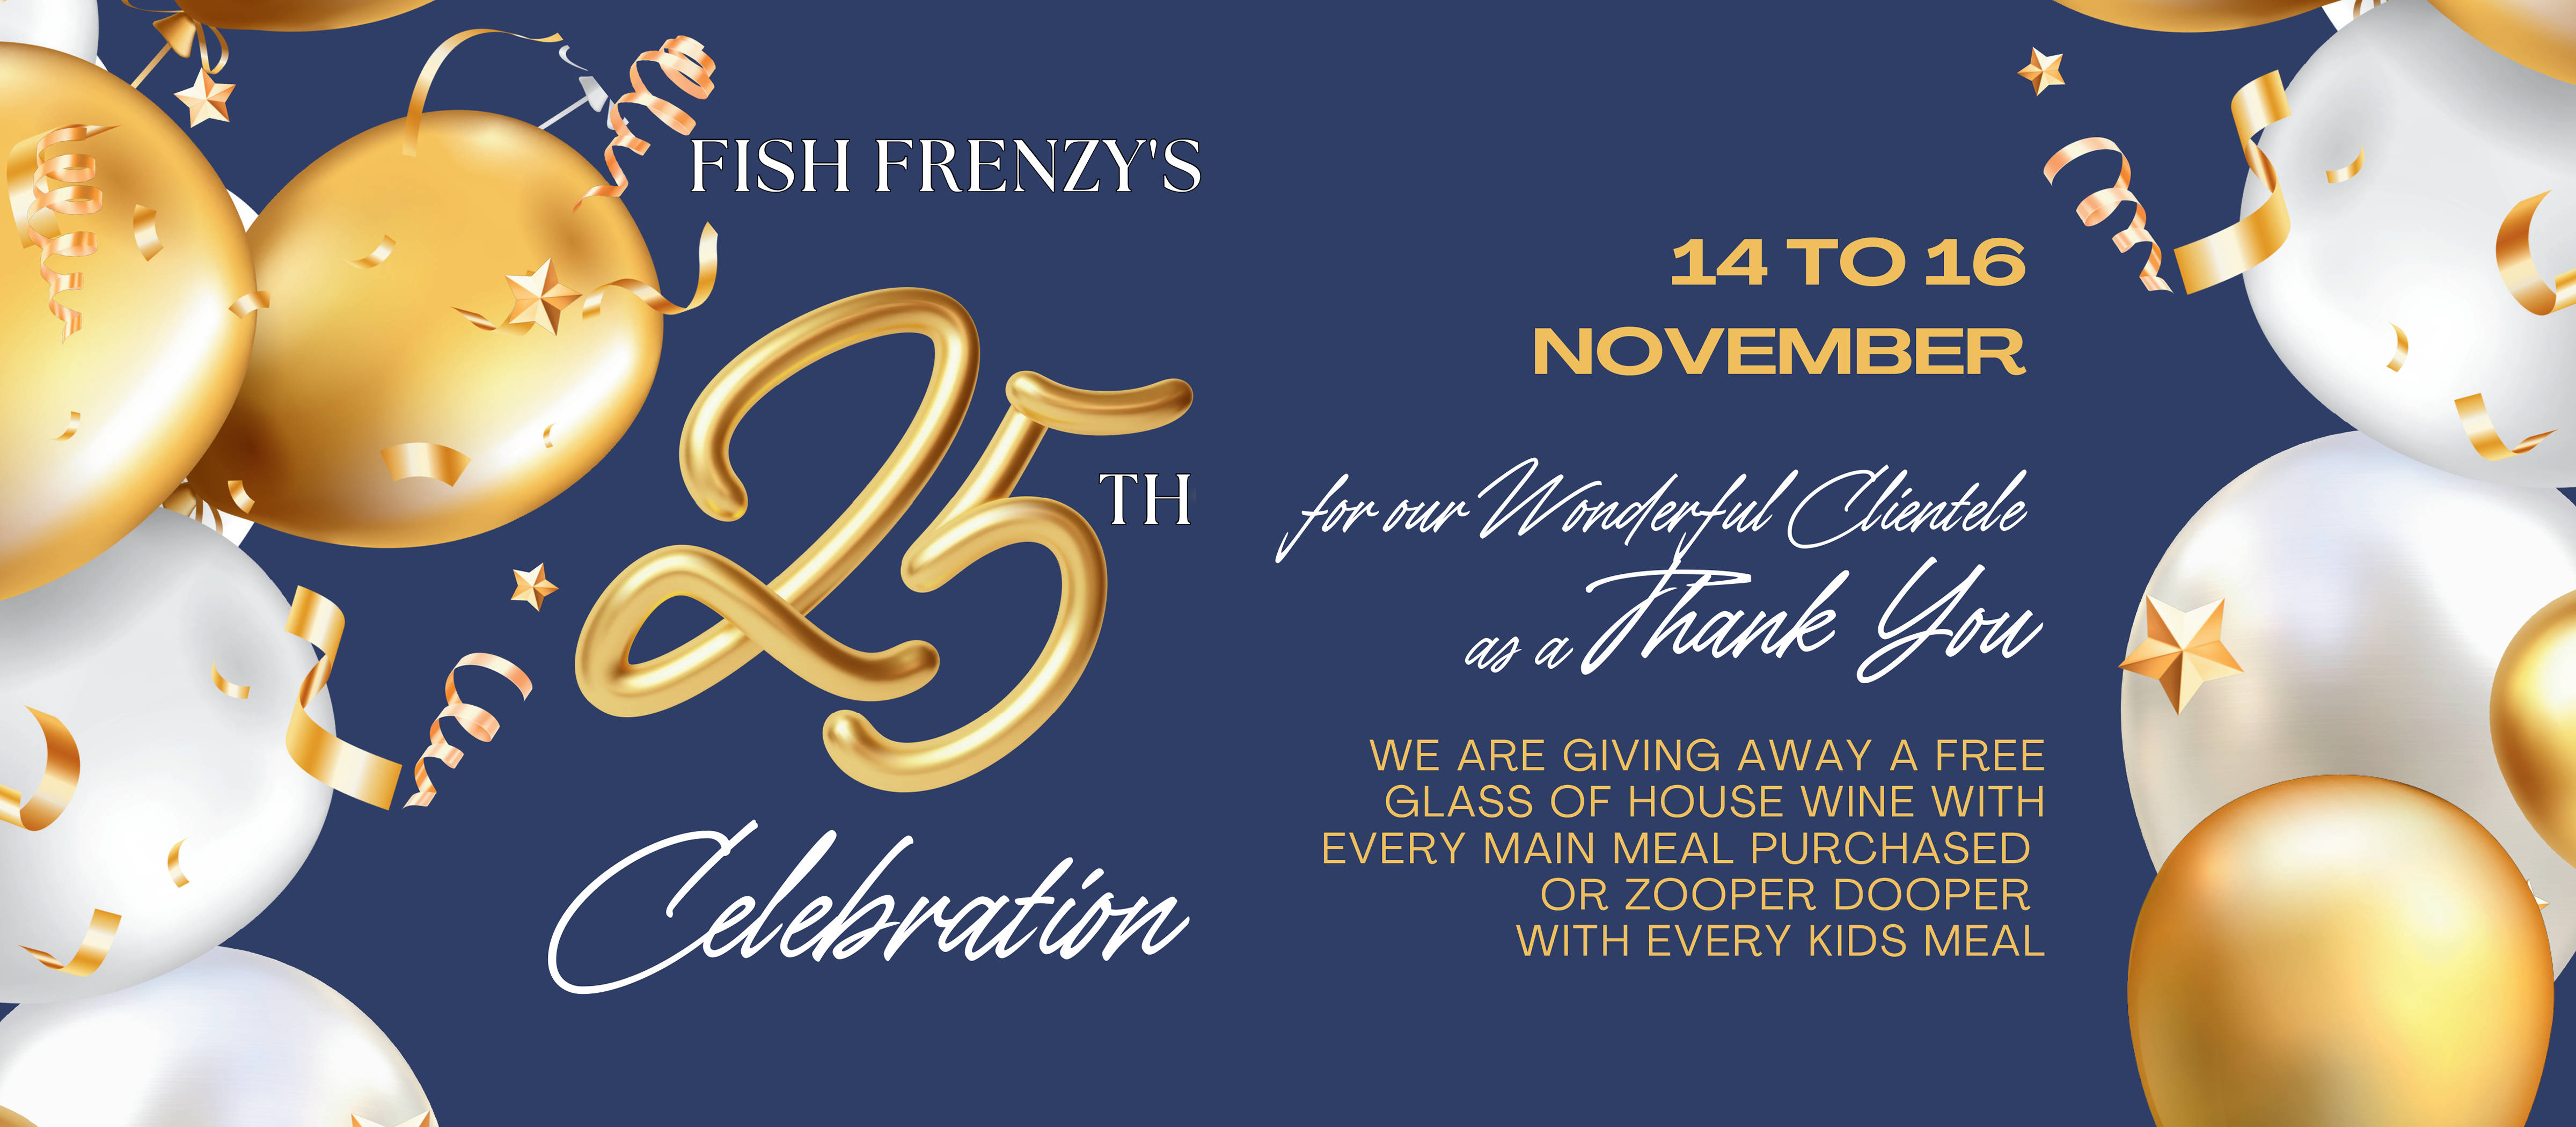 From 14–16 November 2023, as a thank you to our wonderful clientele, we are giving away a free glass of house wine with every main meal purchased, or Zooper Dooper with every kids meal.